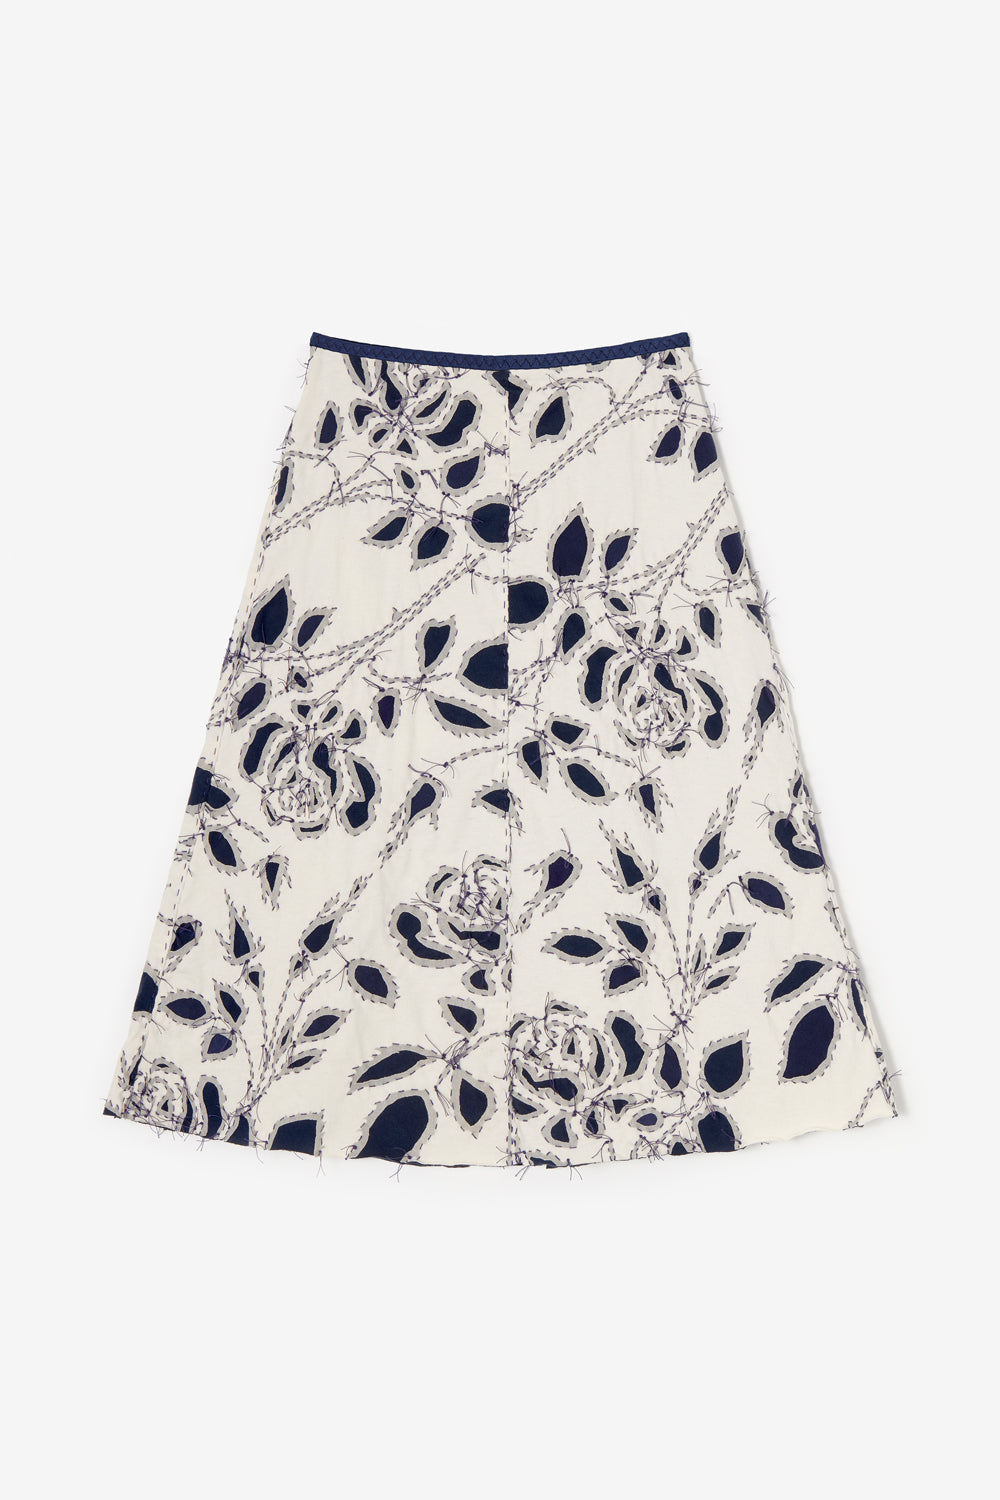 Swing Skirt with rose stencil and reverse appliqué in natural and navy.